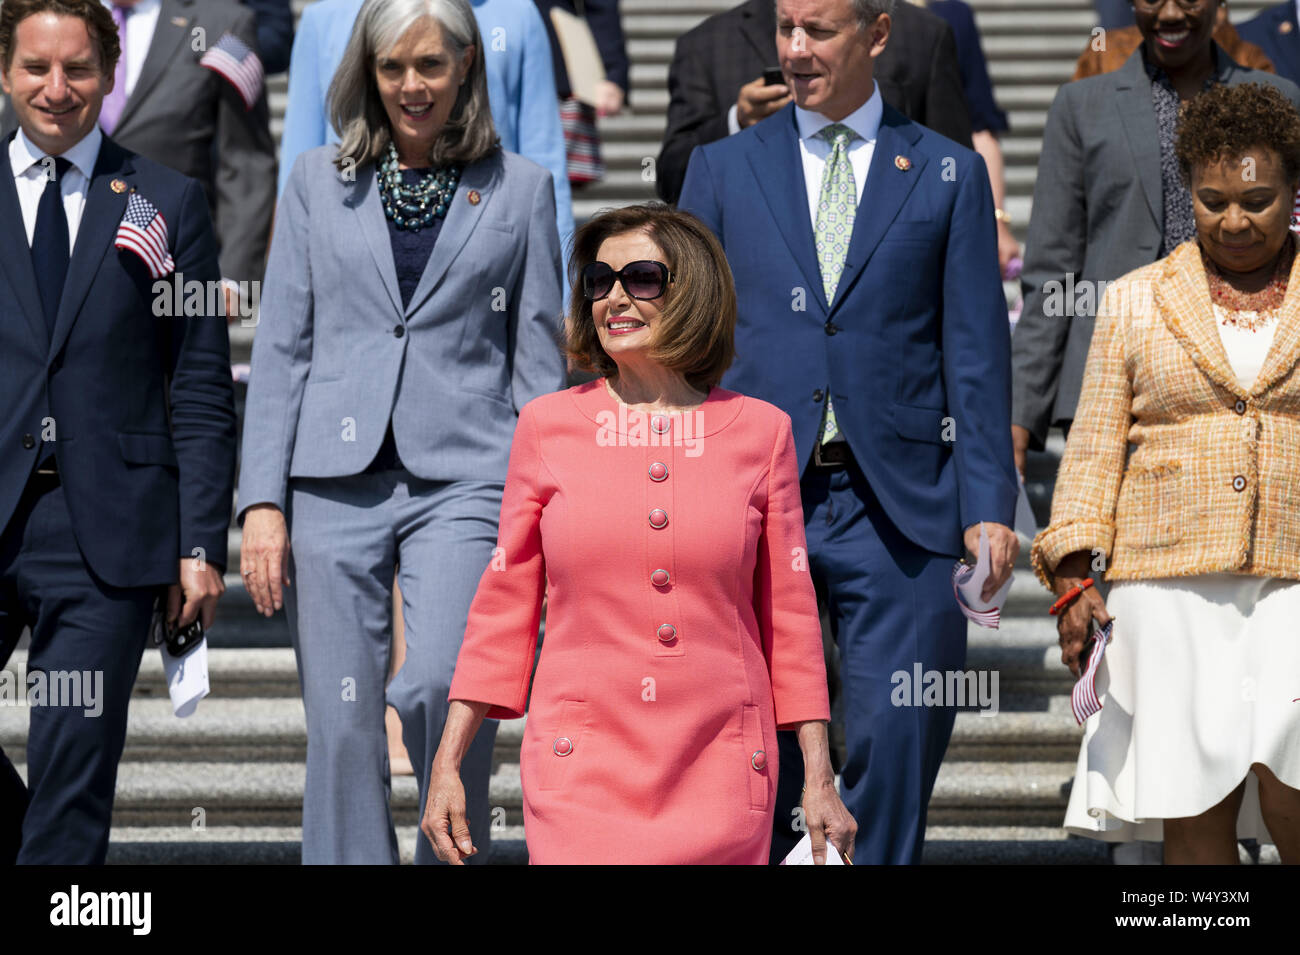 July 25, 2019, Washington, DC, U.S: U.S Representative NANCY PELOSI (D-CA) at a press event with House Democrats on the first 200 days of the 116th Congress, on the steps of the Capitol. Credit: Michael Brochstein/ZUMA Wire/Alamy Live News Stock Photo